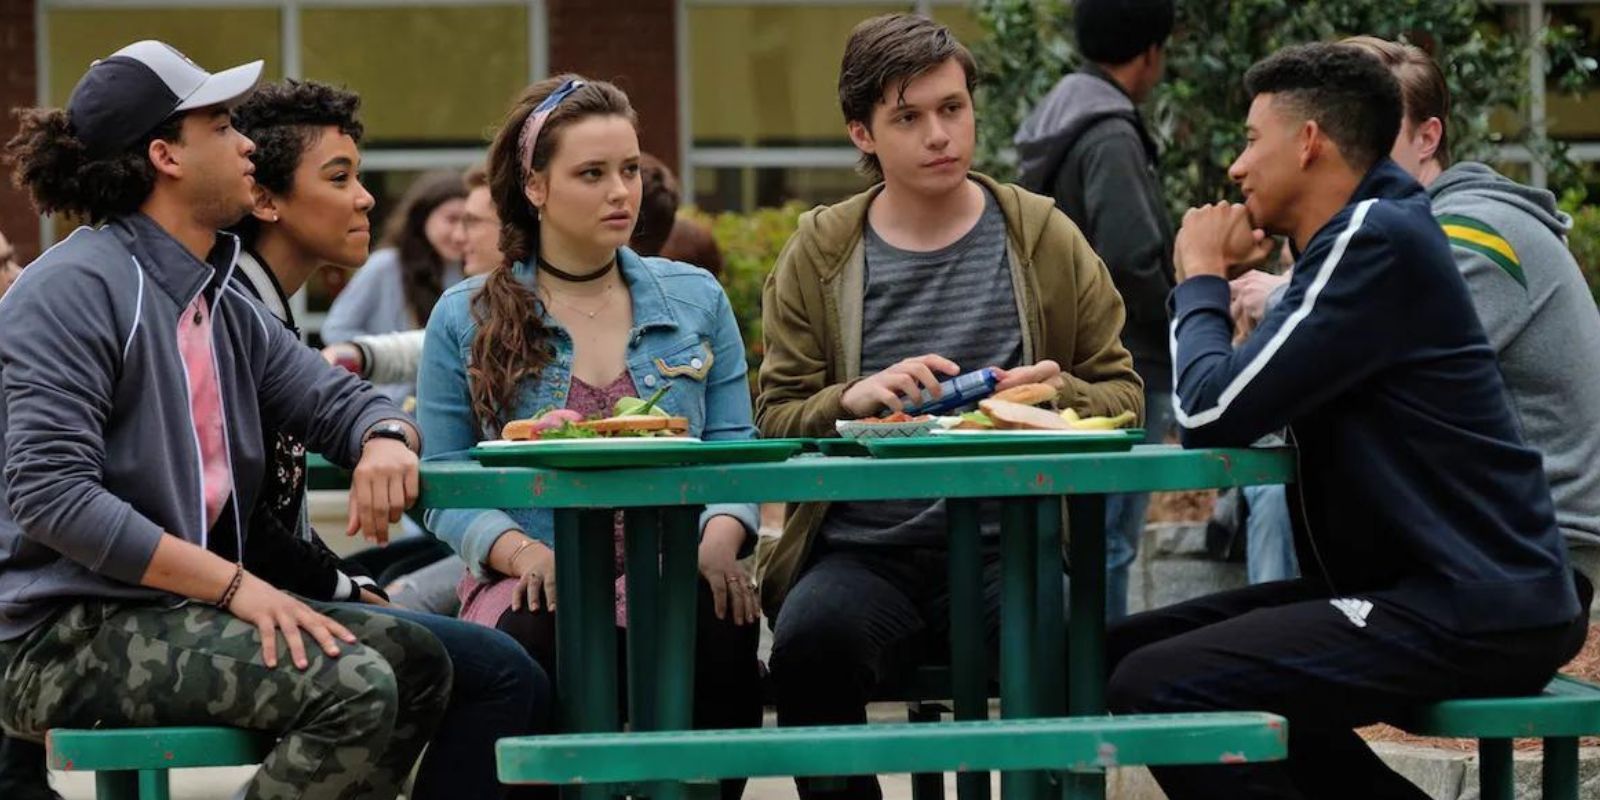 Simon and his friends sit at a lunch table